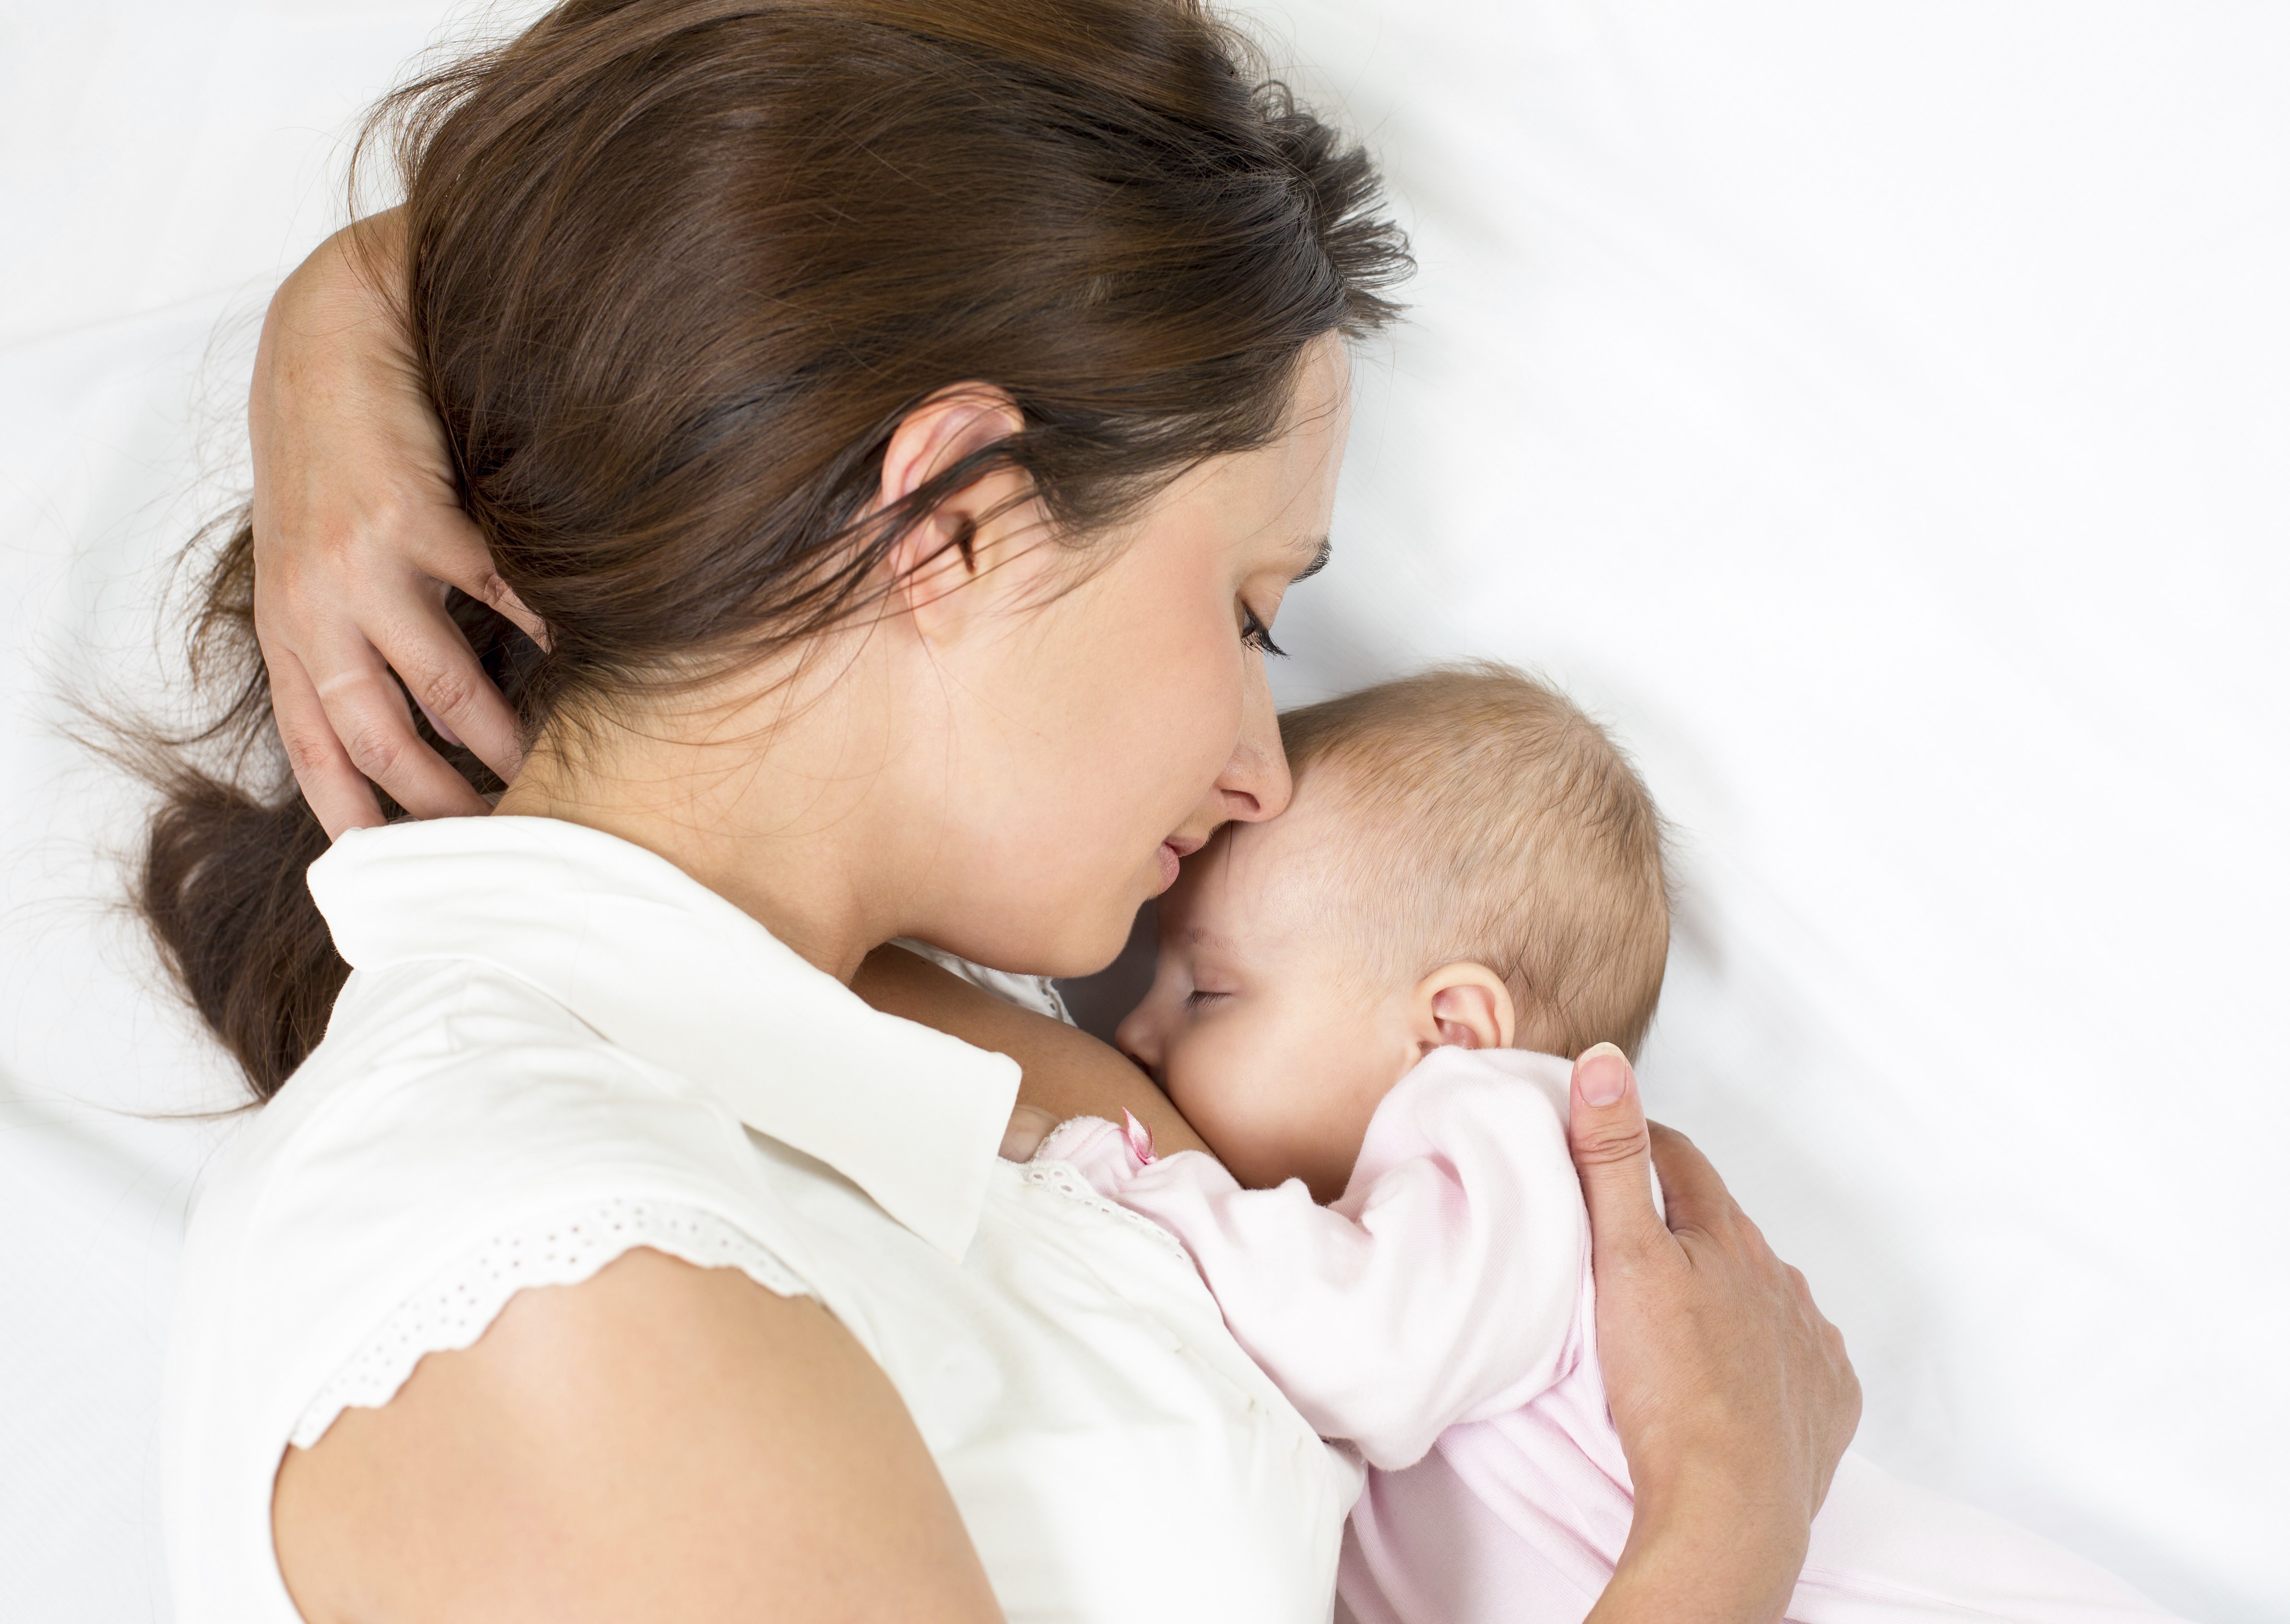 Mother breastfeeding infant daughter while lying down